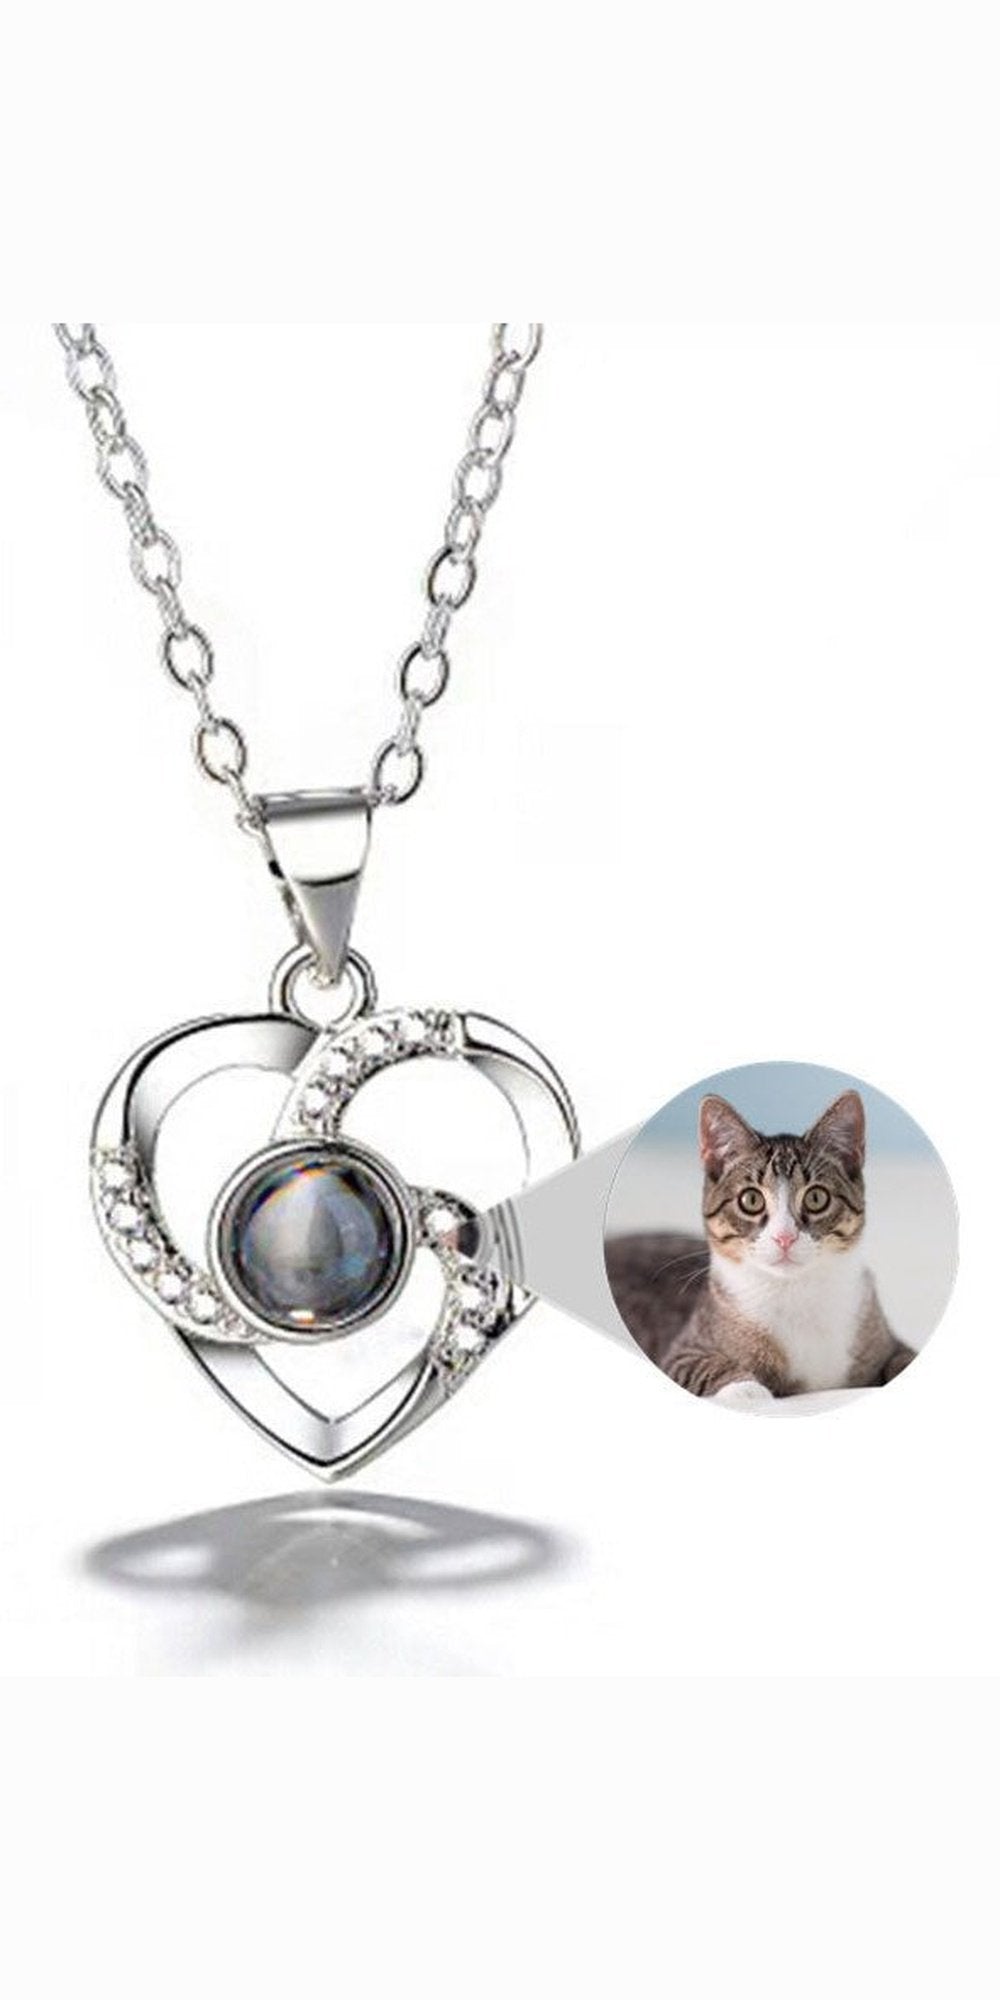 S925 Silver Romantic Colorful Photo Projection Necklace Heart Shaped Pendant Necklace